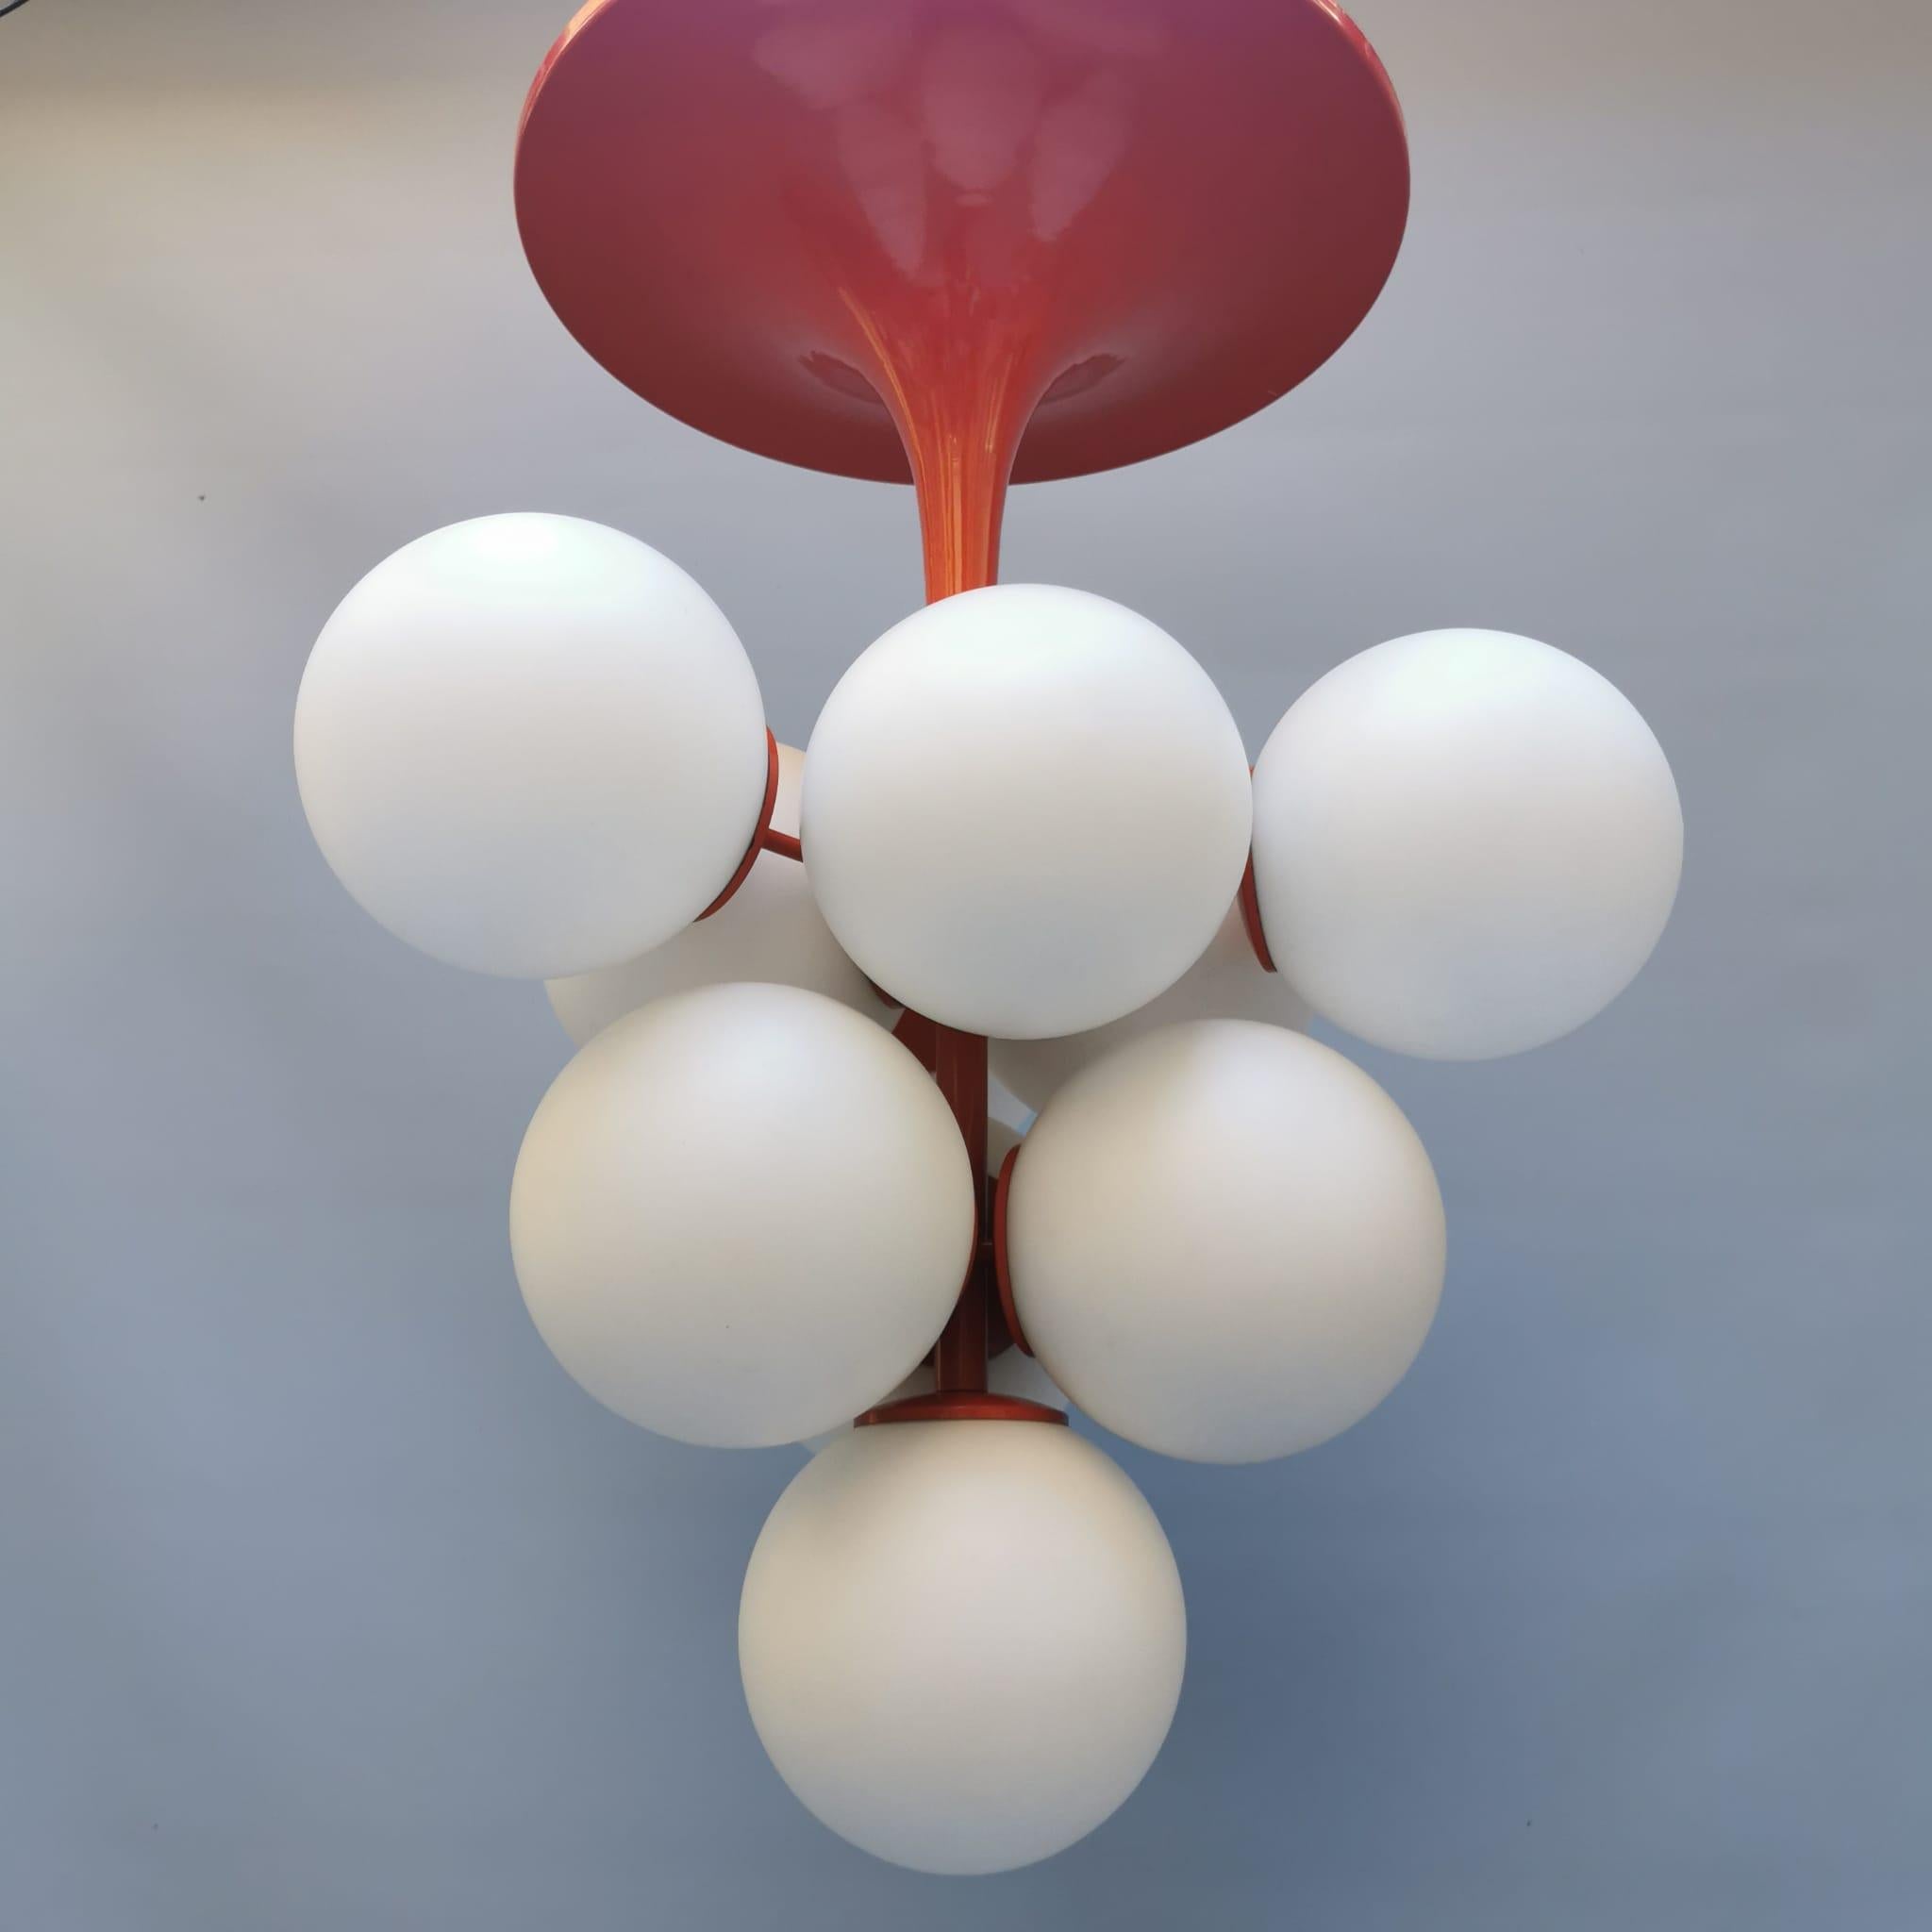 A Swiss-made 1960s chandelier by Temde Leuchten, Switzerland. This lamp consists of ten frosted glass globes and a red enamel metal base and stem. This lamp is a real statement piece, whether turned on or off it attracts easily attention in any